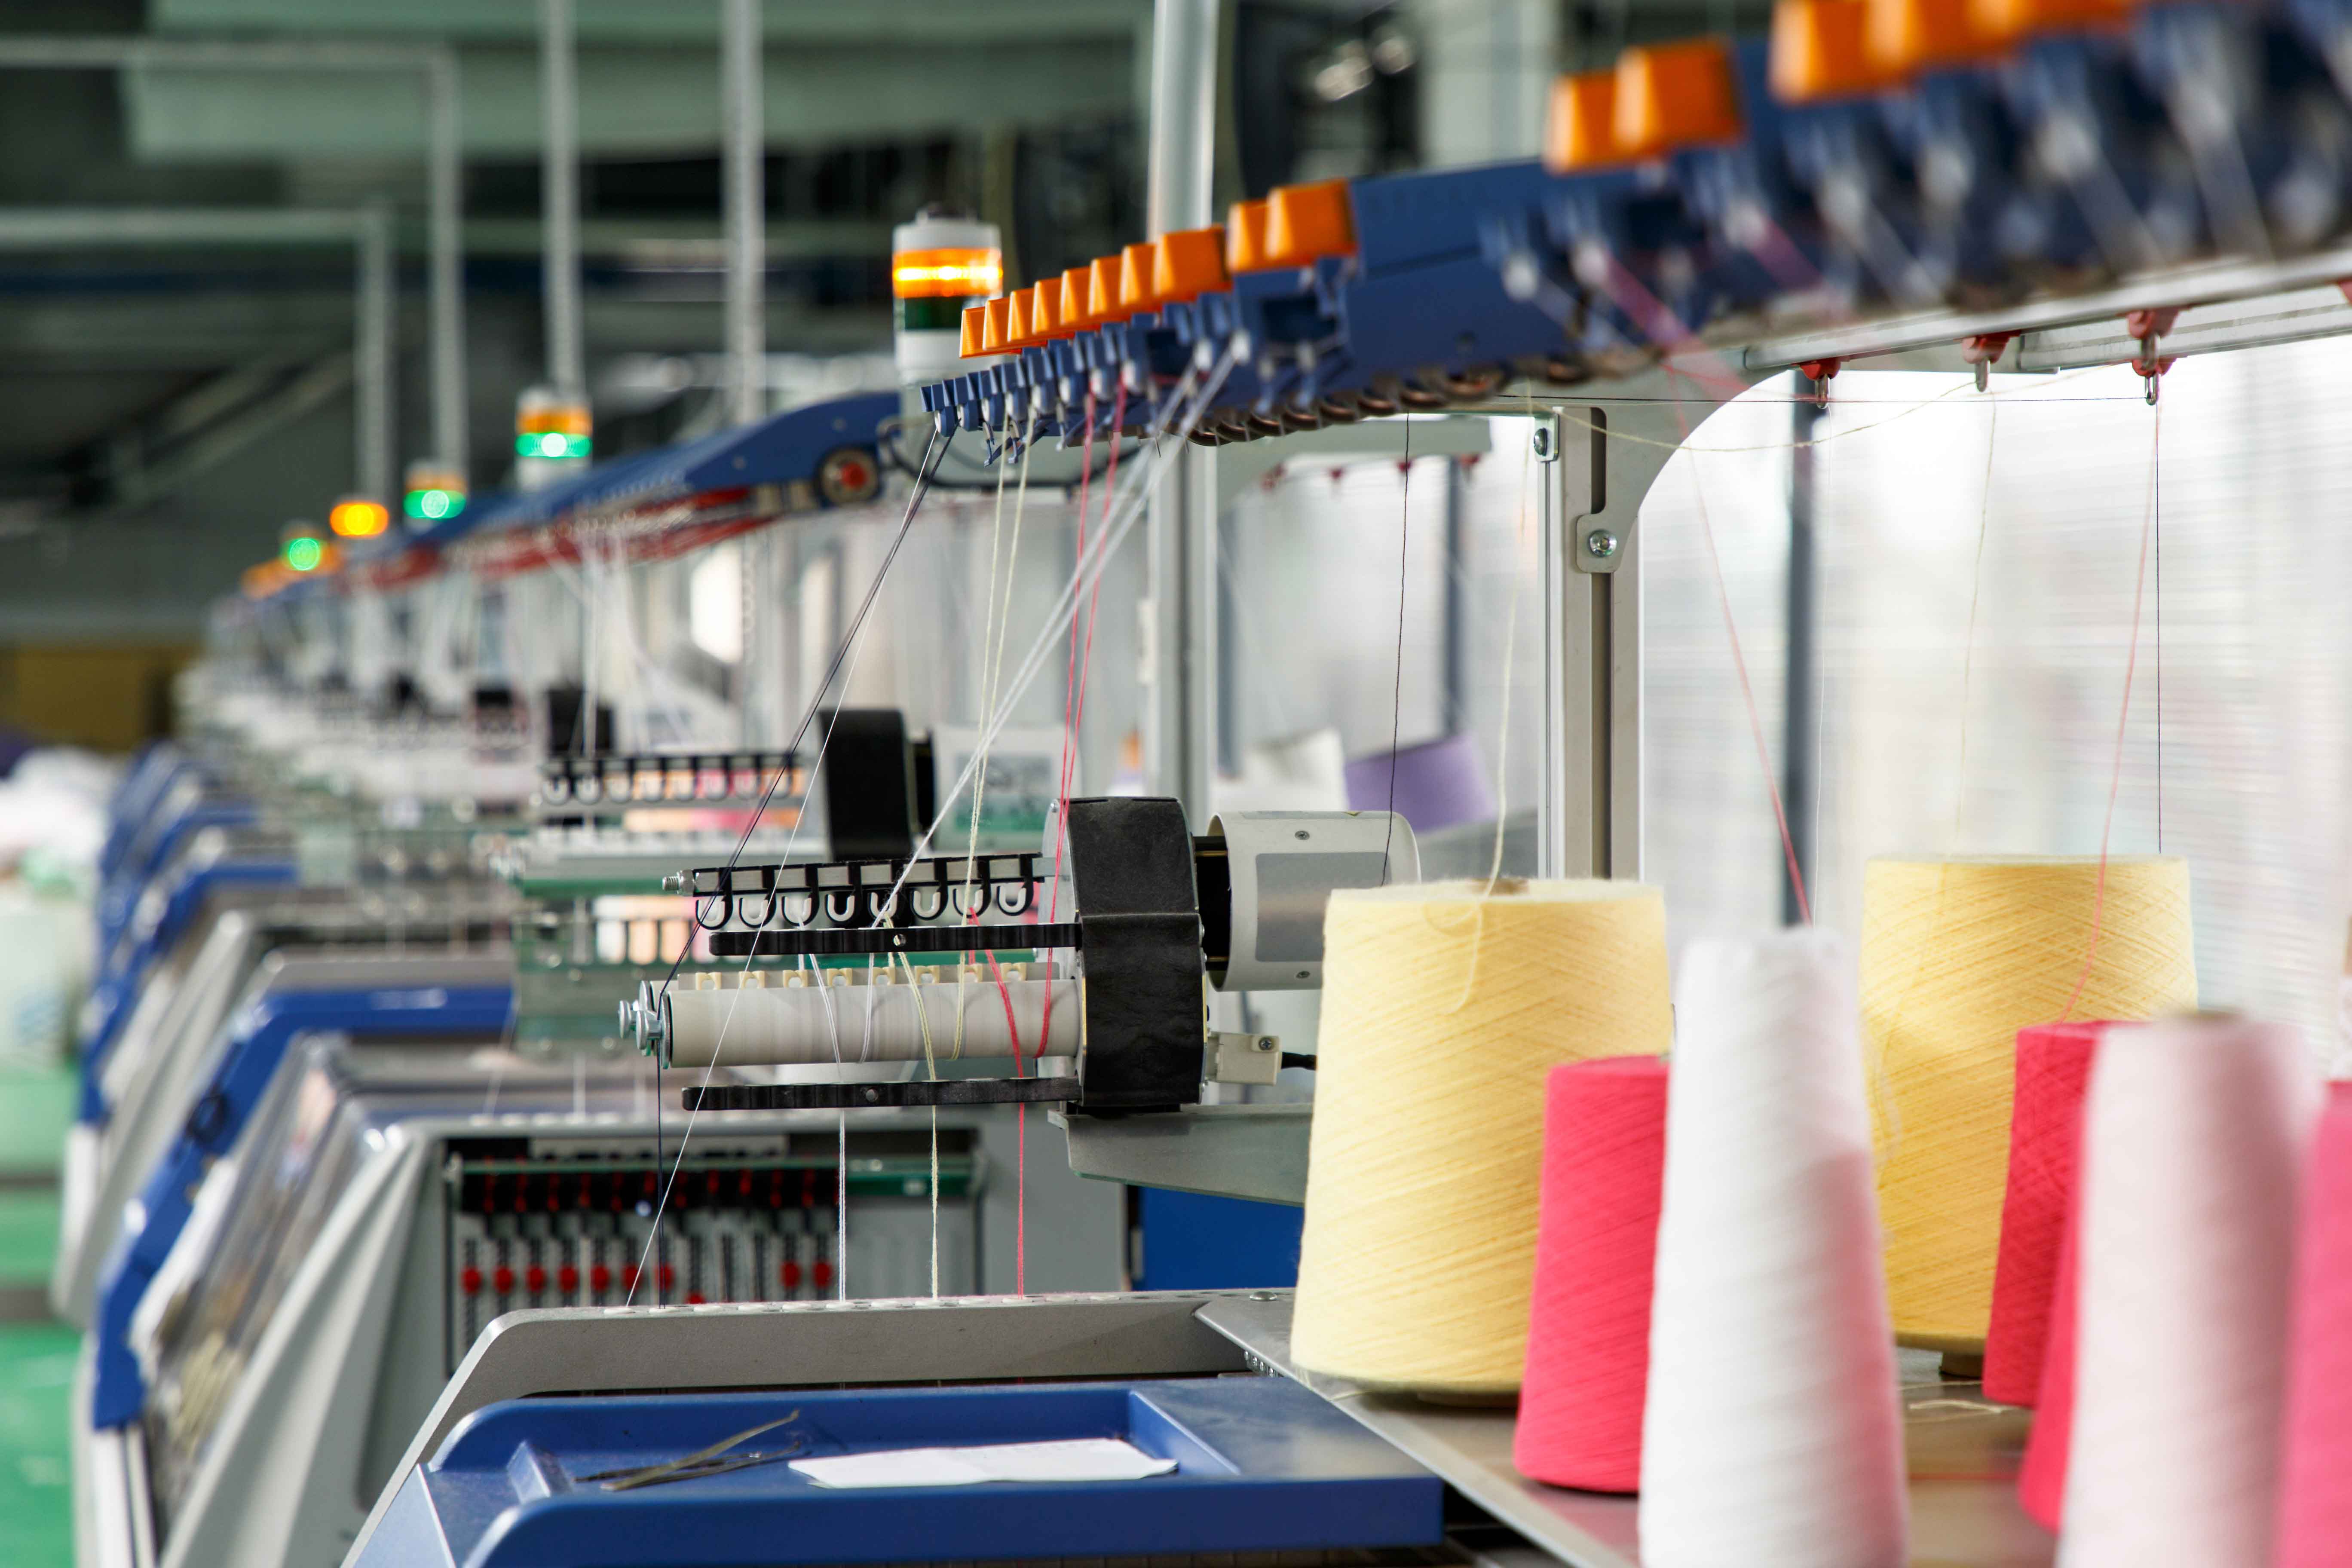 Textile and Apparel: The Turkish clothing and apparel industry has several strengths, including the high quality of its products, the amplitude of raw materials, the ability to meet private demands, adjustability, and Turkey